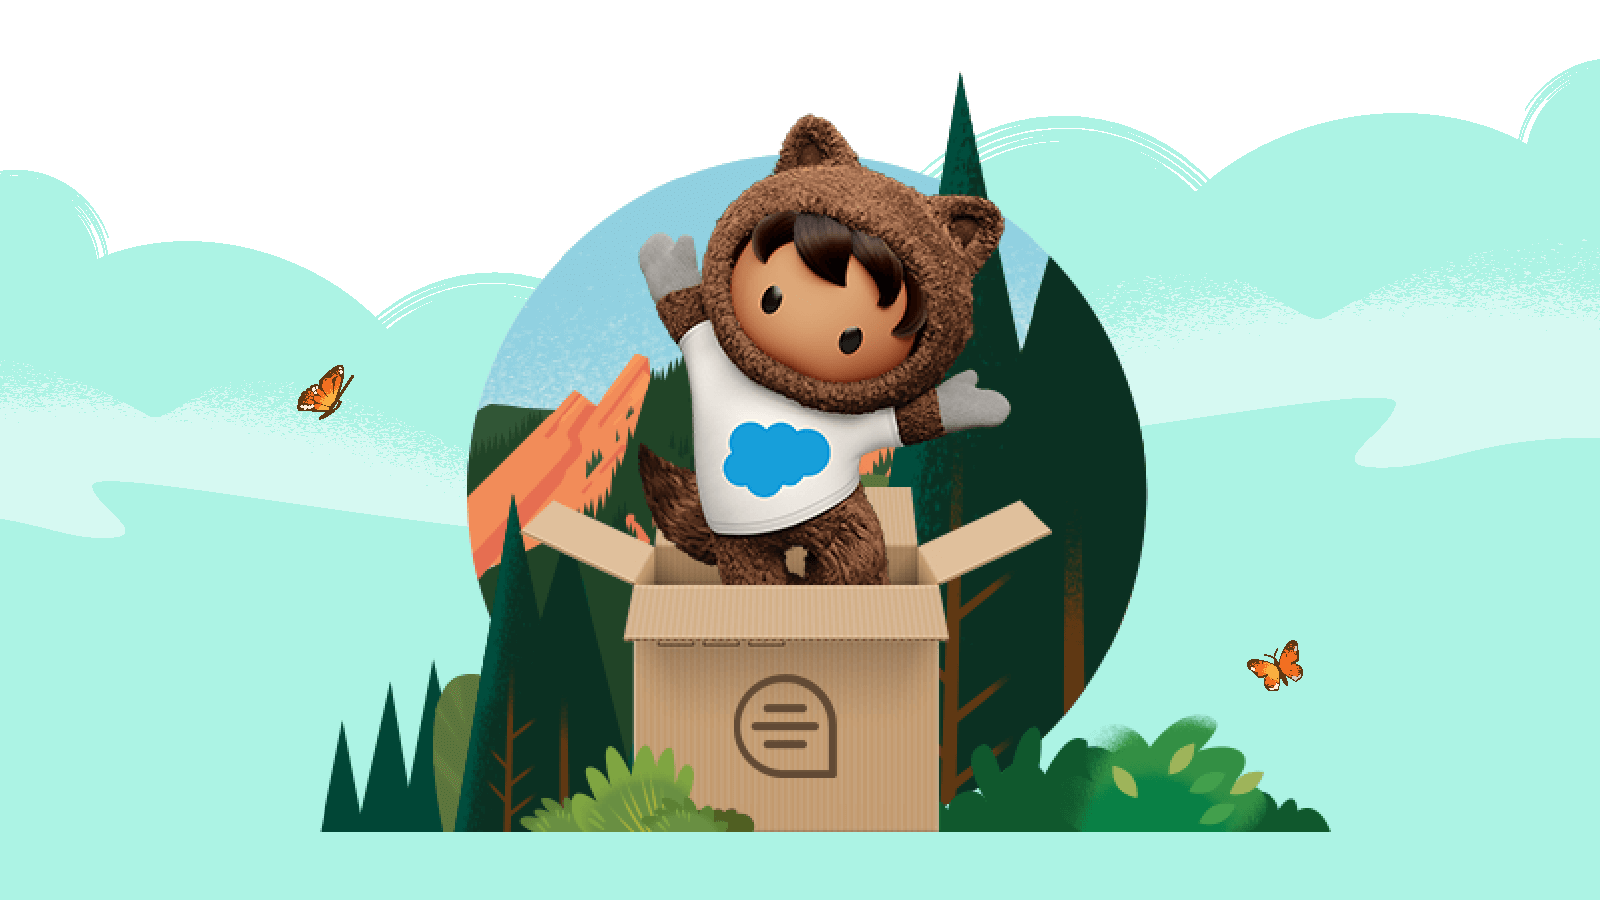 Astro jumps out of a box to convey excitement over the ease of account planning with Quip